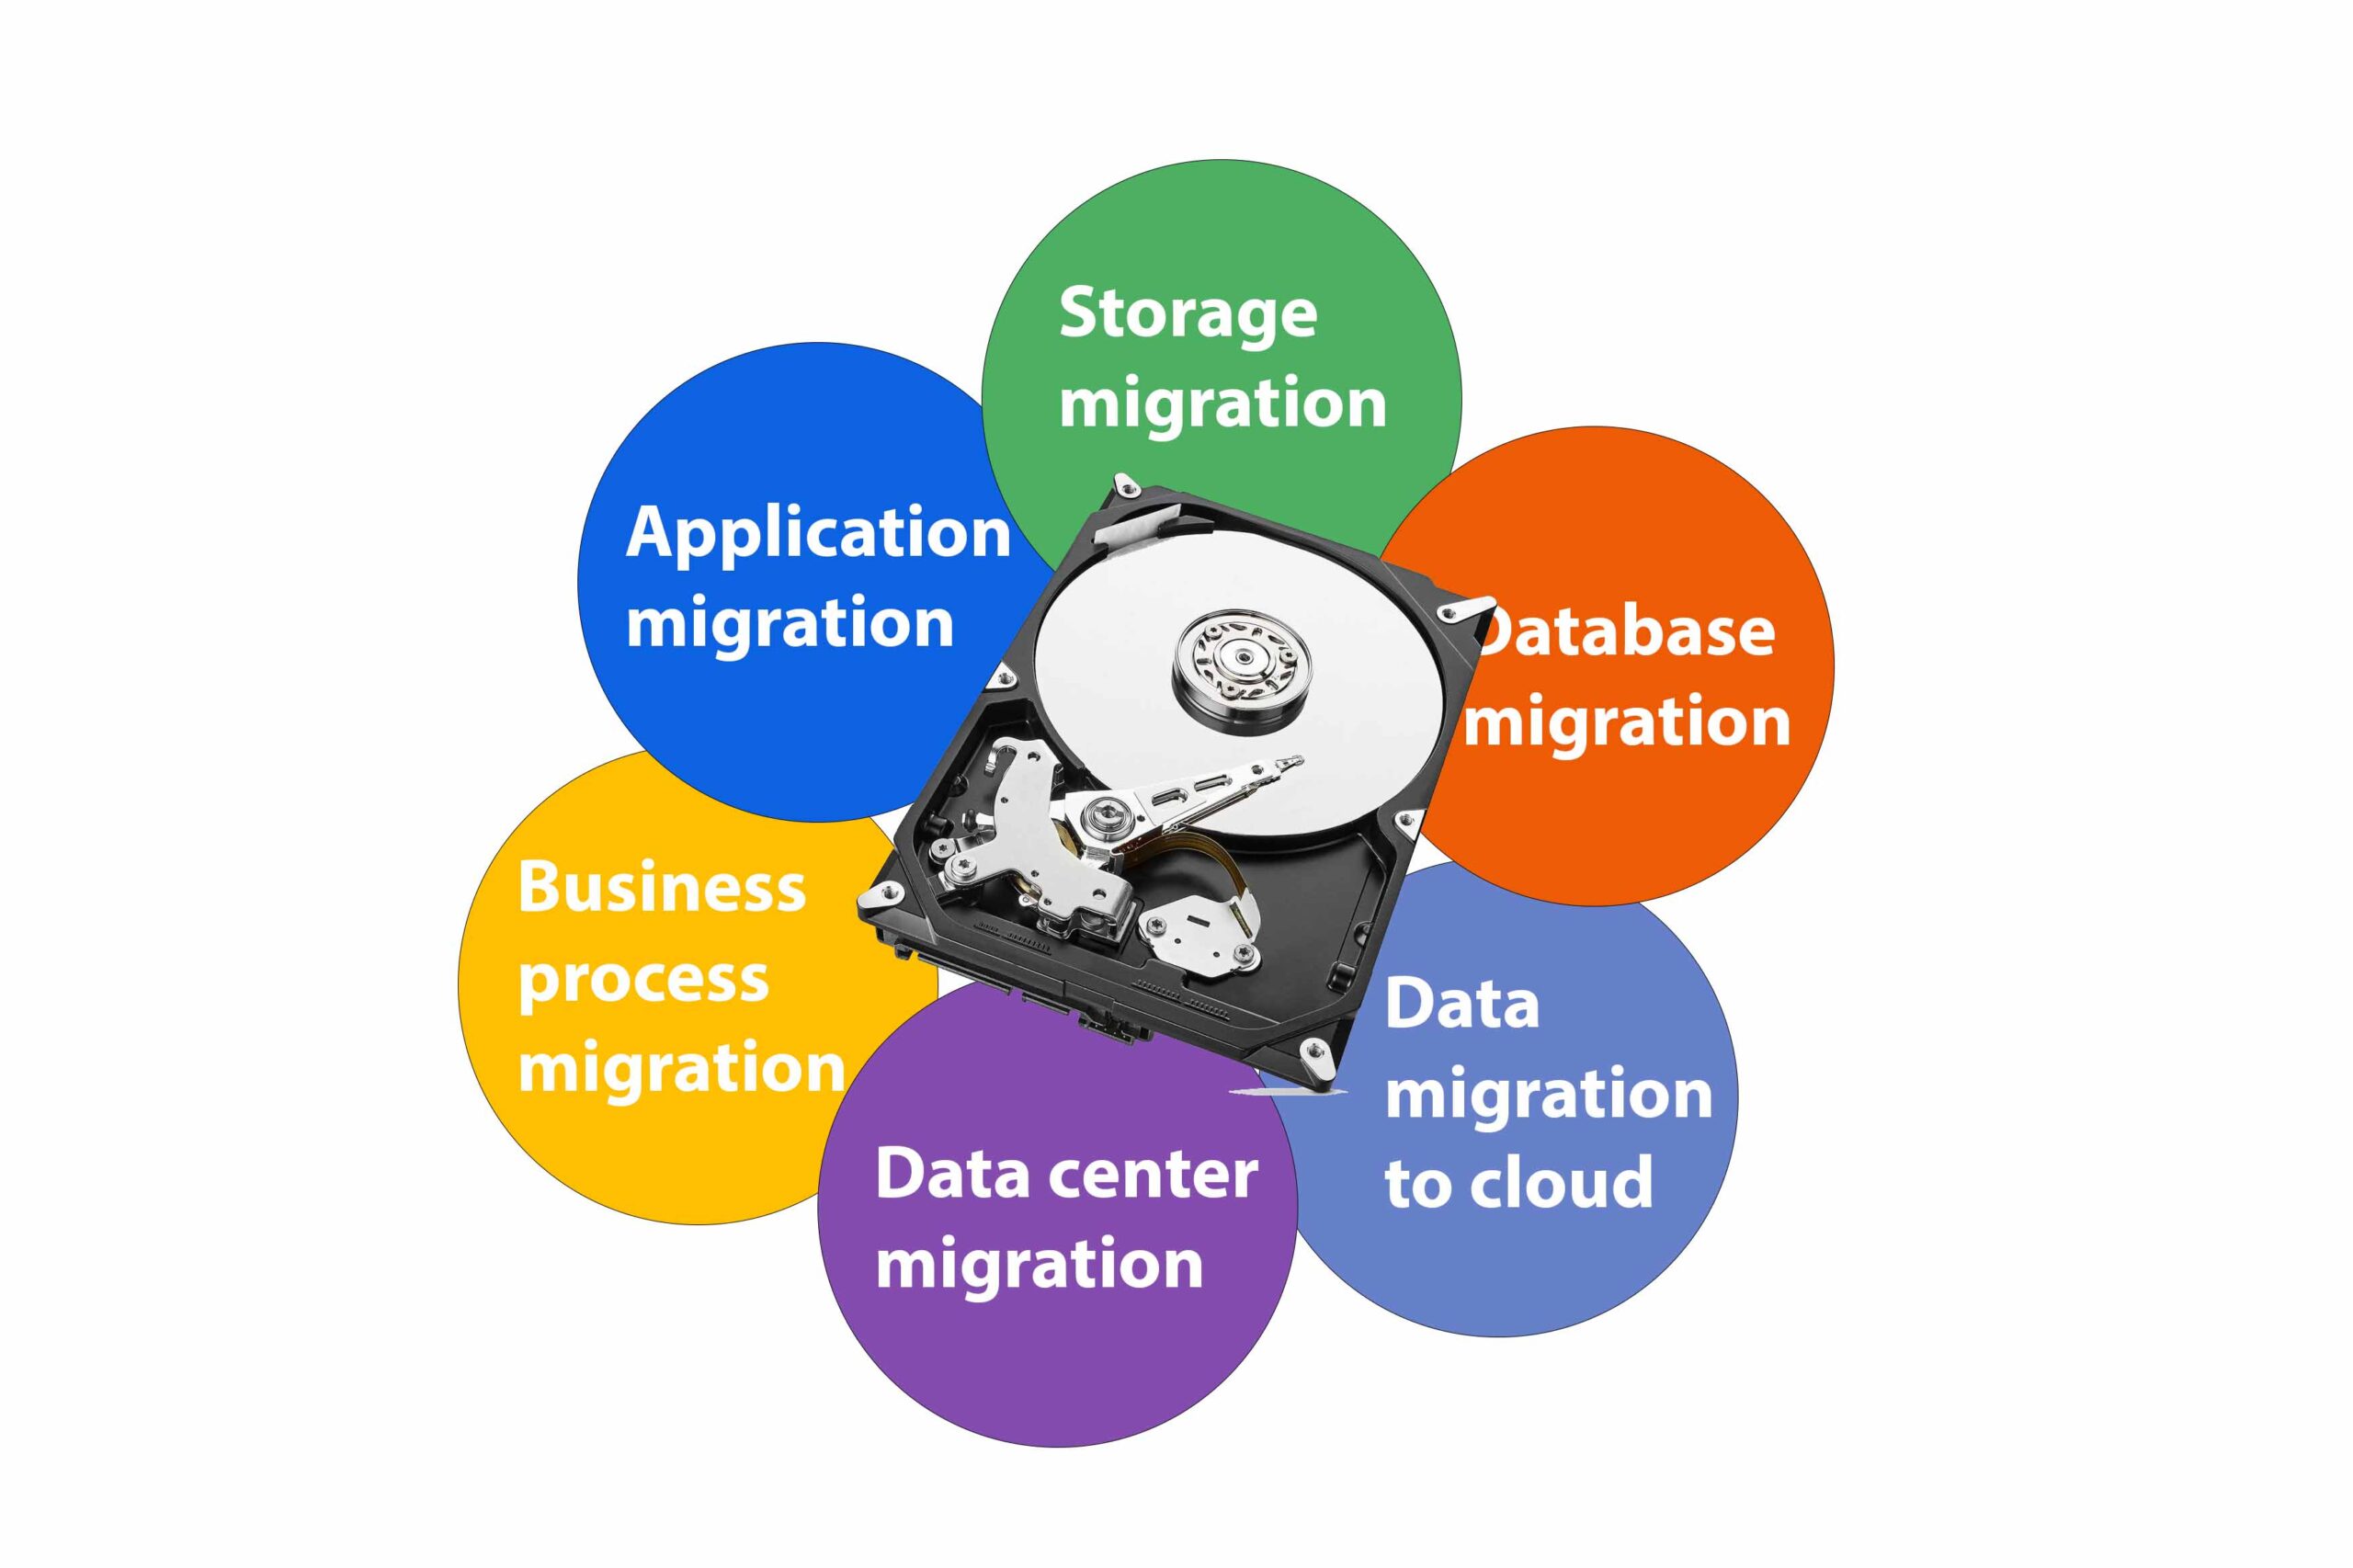 Types of Data Migration